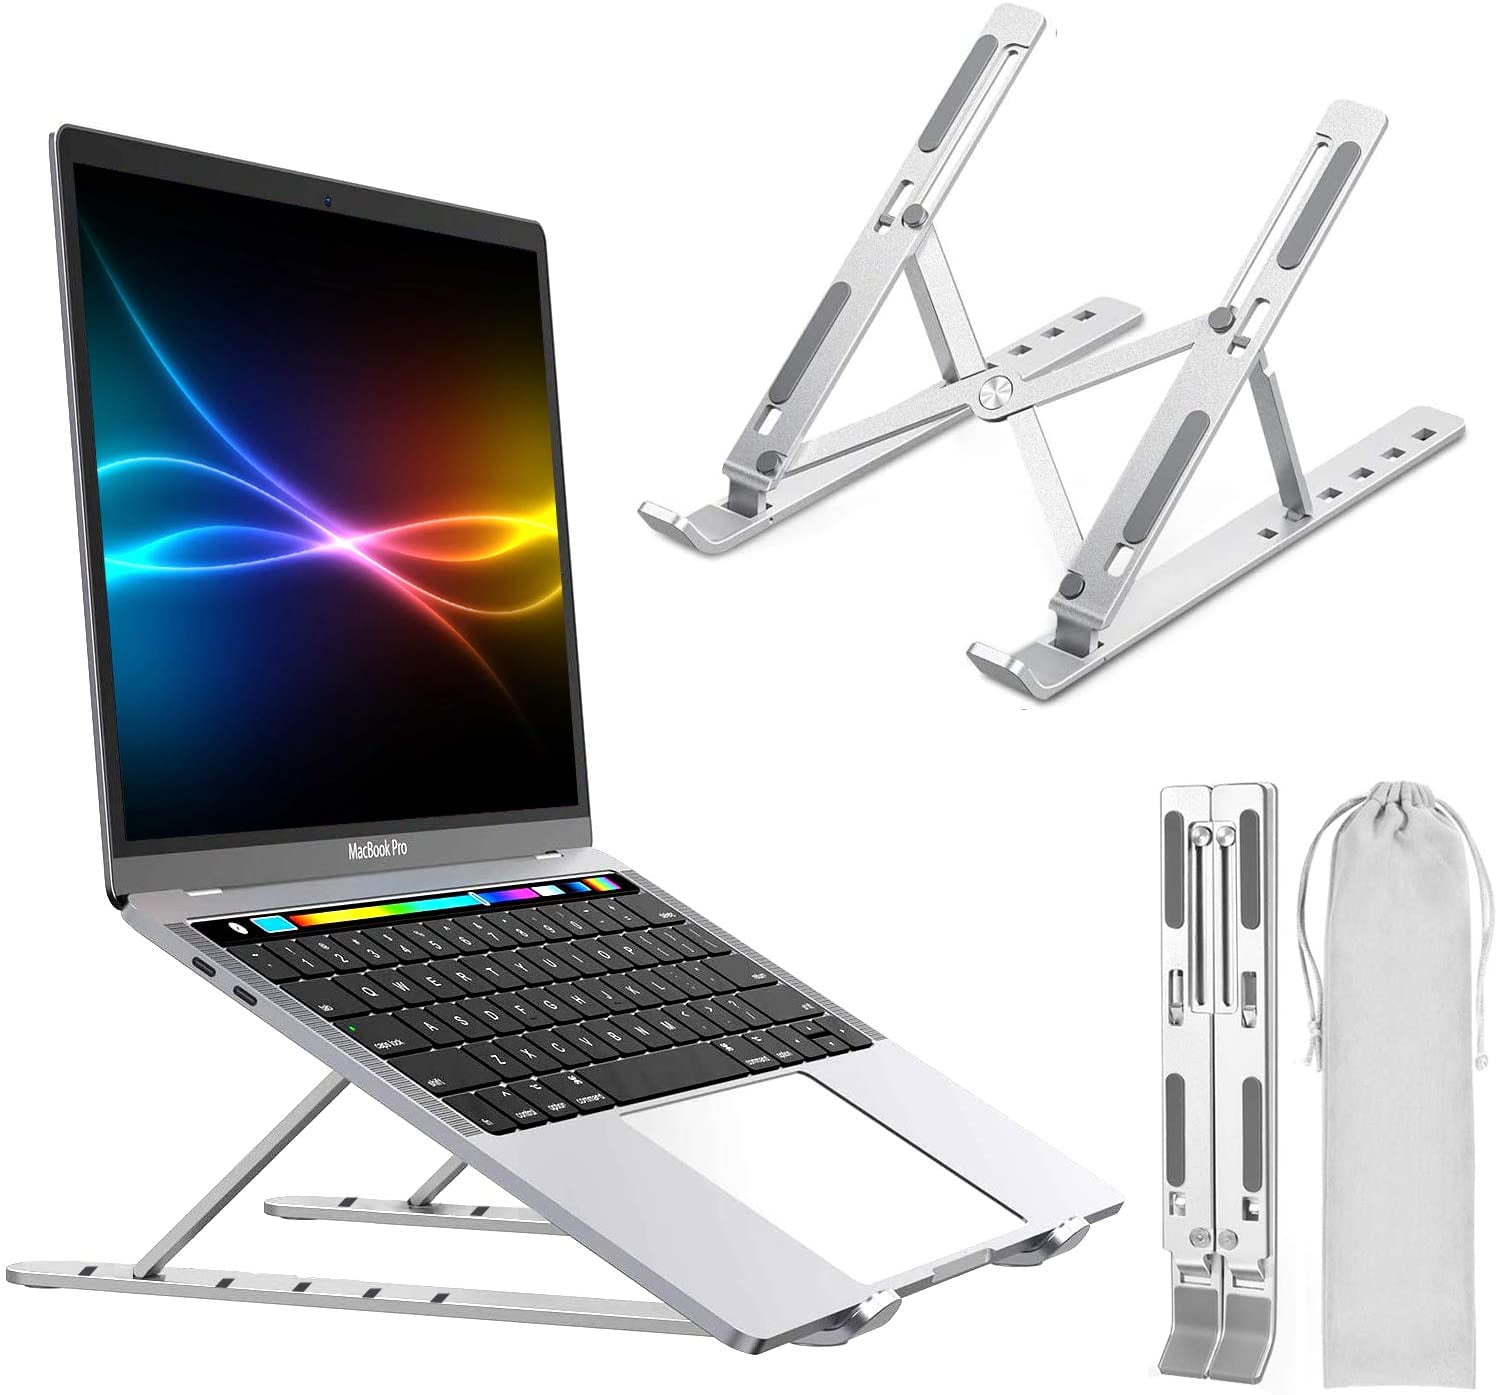 Laptop Stand Laptop Holder Riser Adjustable Height Foldable Portable Aluminum MacBook Holder Notebook Stand Compatible with 9-15.6 inch Laptops